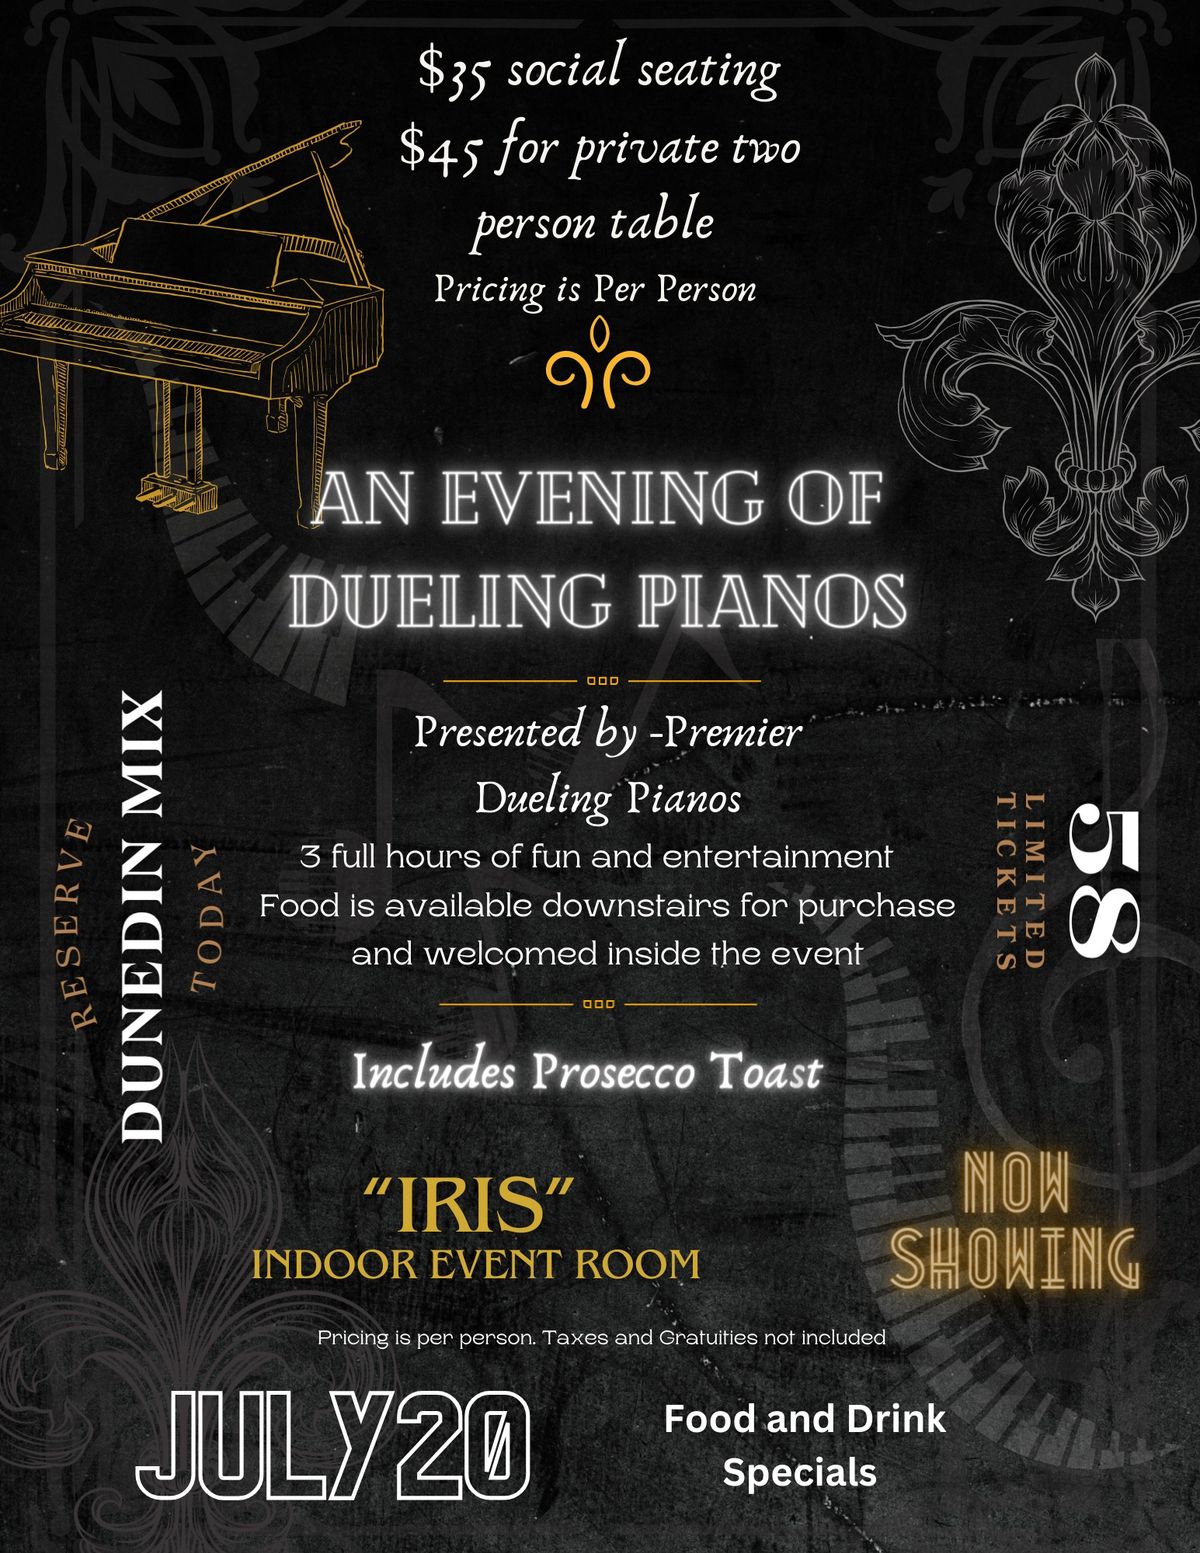 An Evening of Dueling Pianos - July 20 SOLD OUT